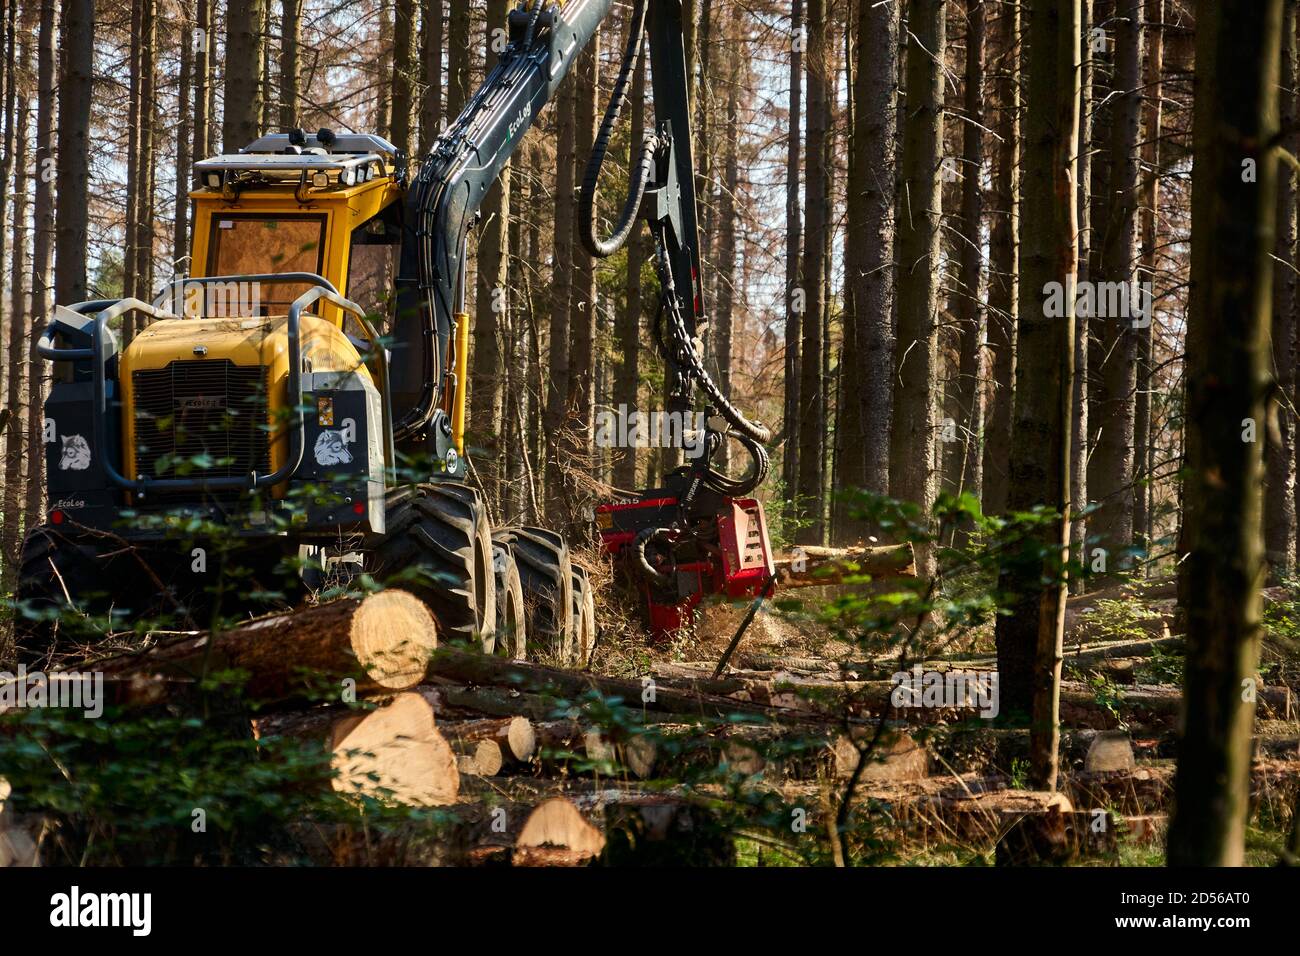 Bad Harzburg, Germany, September 14., 2020: Harvester cuts down dead trees to protect the forest Stock Photo